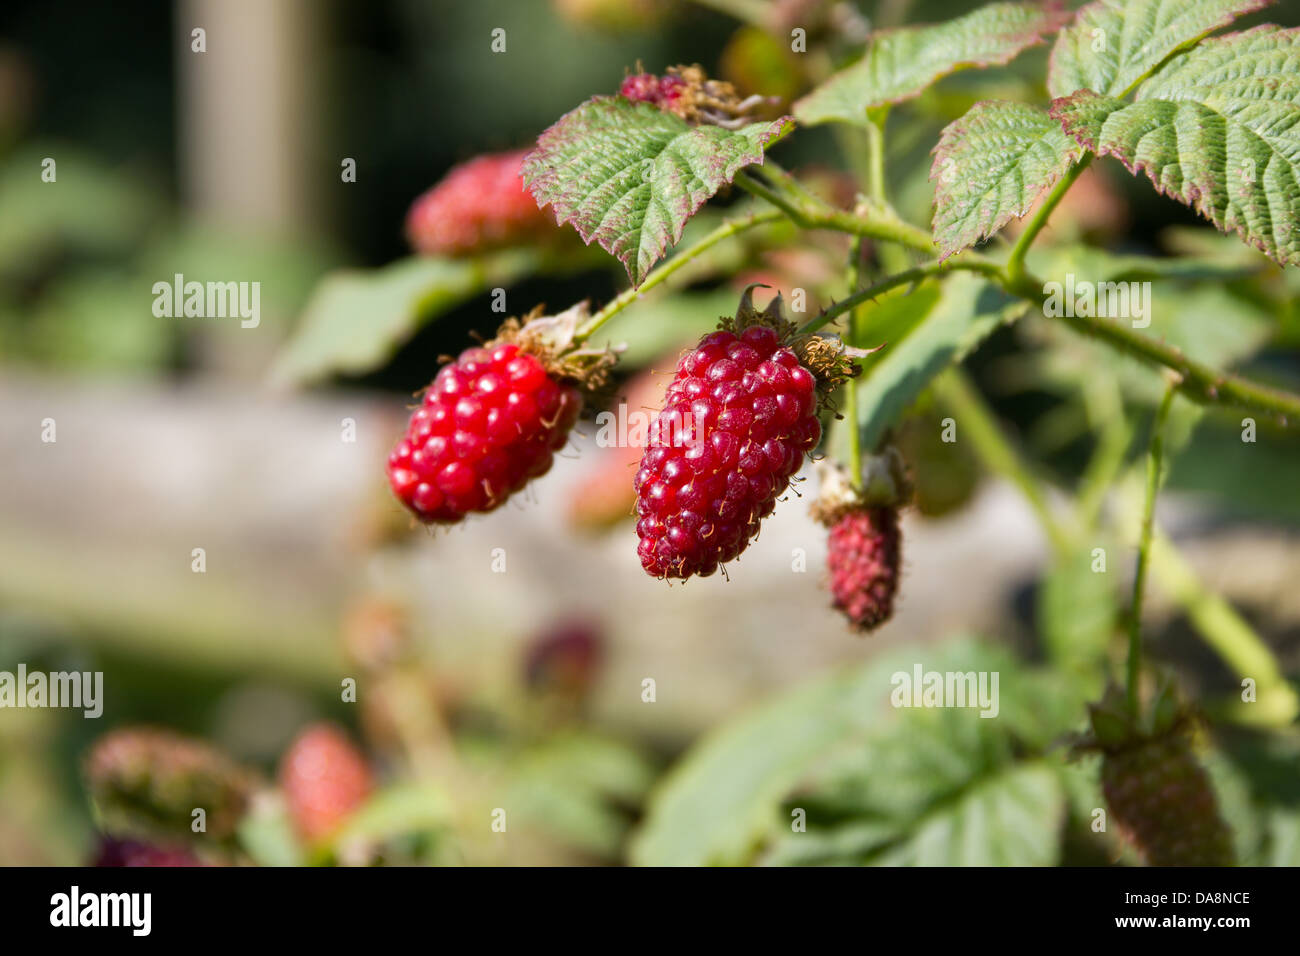 Tayberry plant Stock Photo